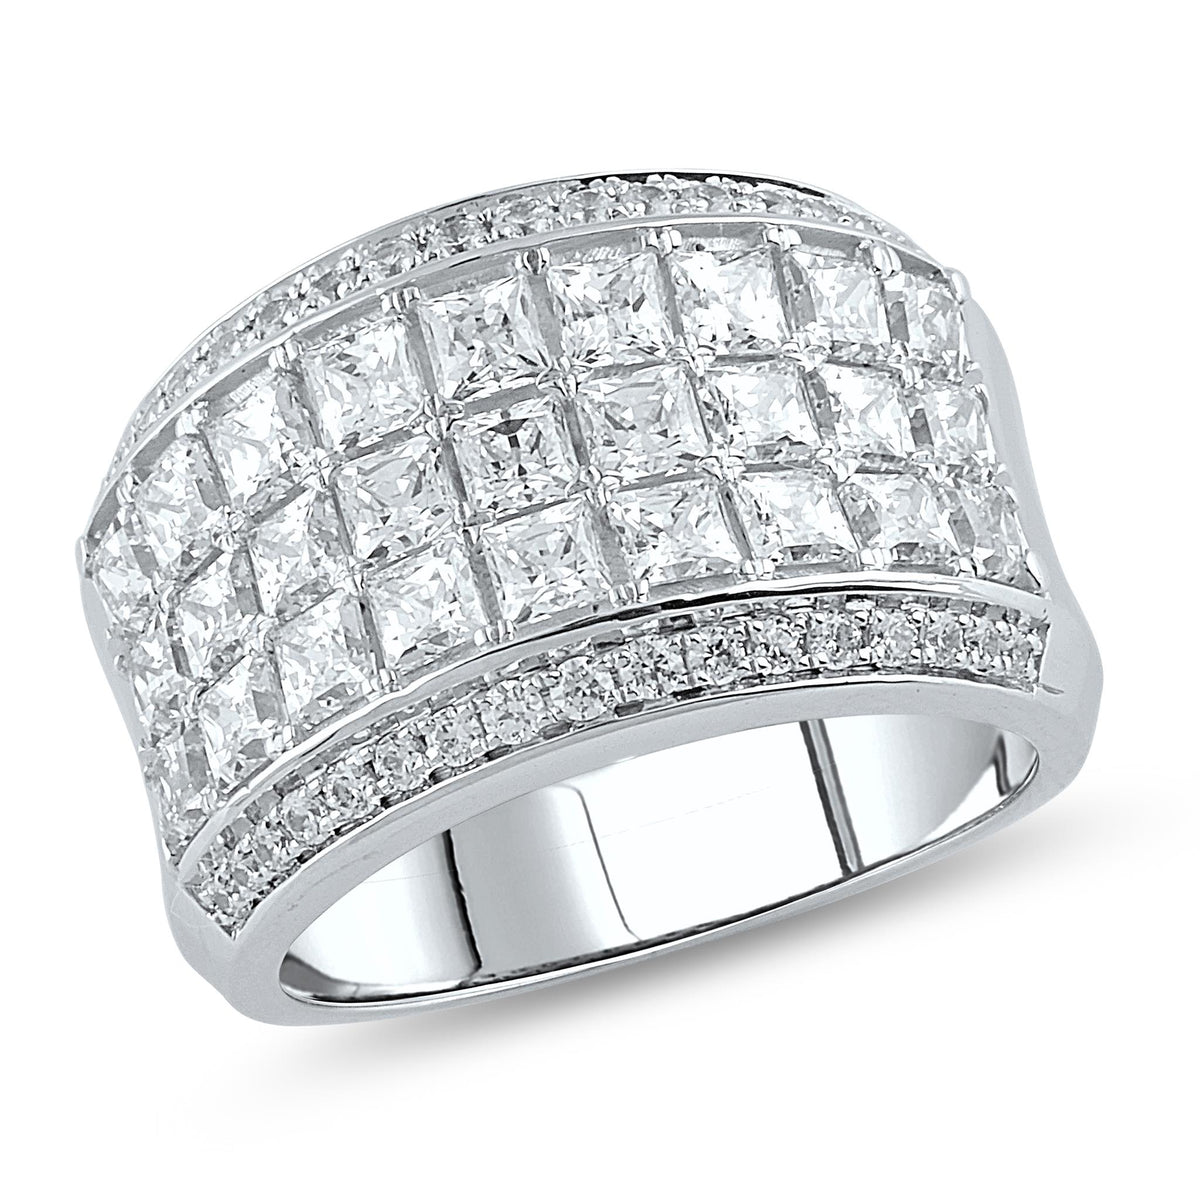 Invisible Set 14Kt White Gold Classic Ring With 3.00cttw Natural Diamonds